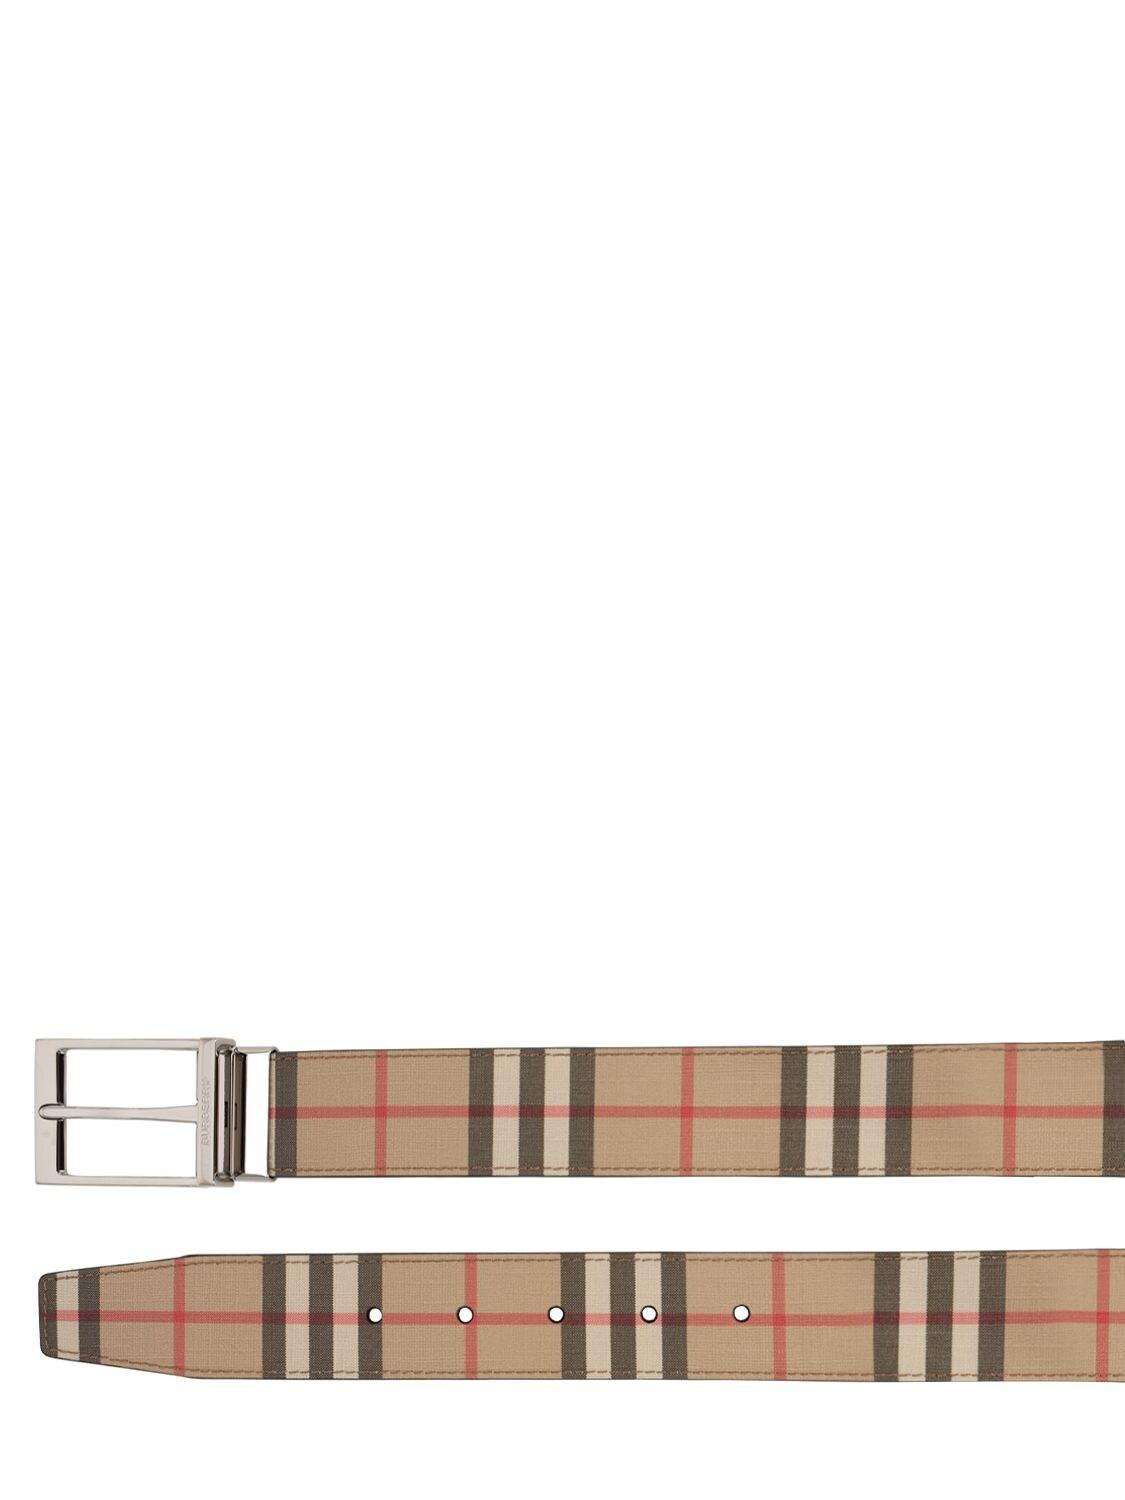 Burberry 35mm Reversible Faux Leather Belt in Natural for Men - Lyst